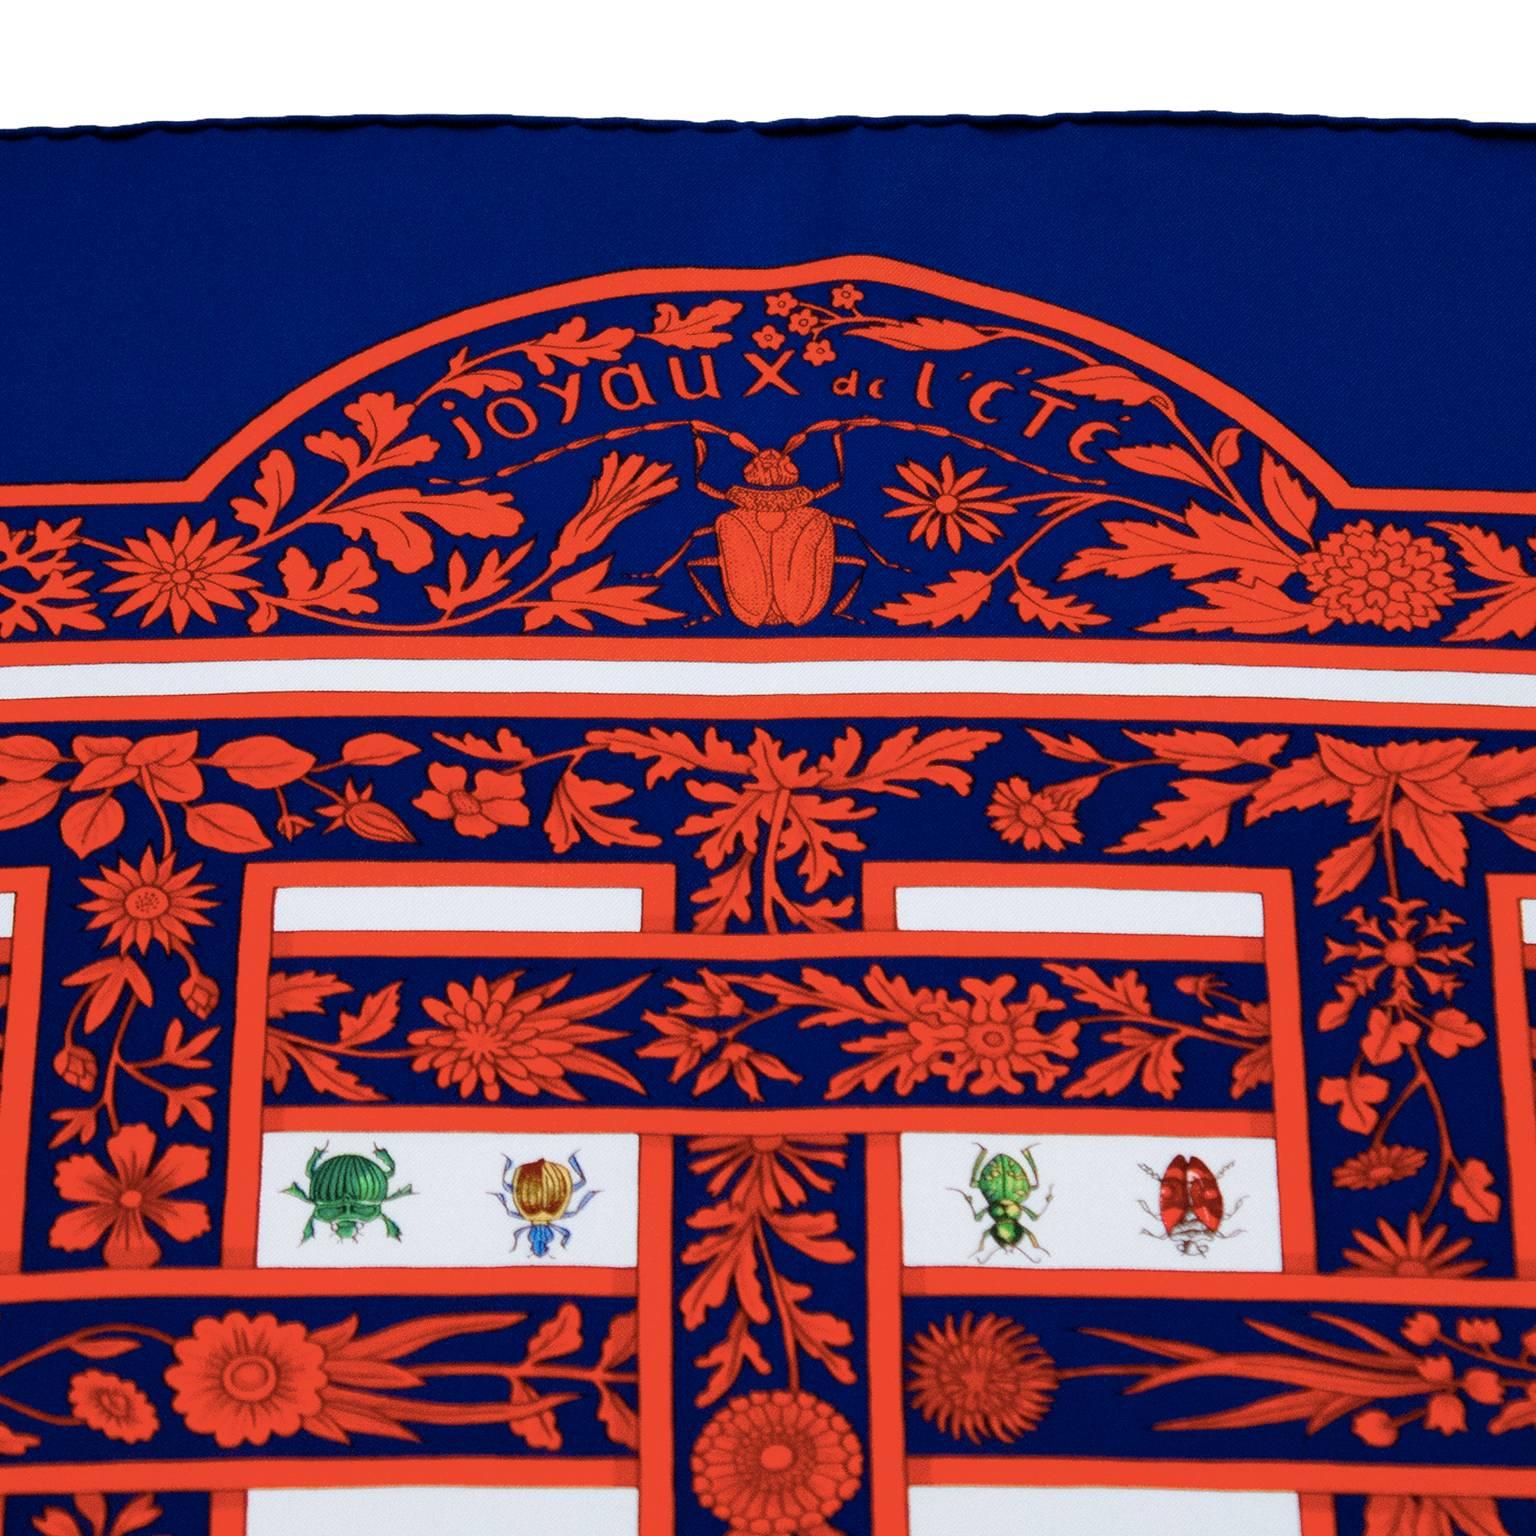 Mint condition 1995 Hermes Joyaux d'Ete navy and red silk scarf. Unused condition, vibrant coloration in red, and blue with multi colored butterflies and dragonflies. Designed by Antoine de Jacquelot. Measures 35.5